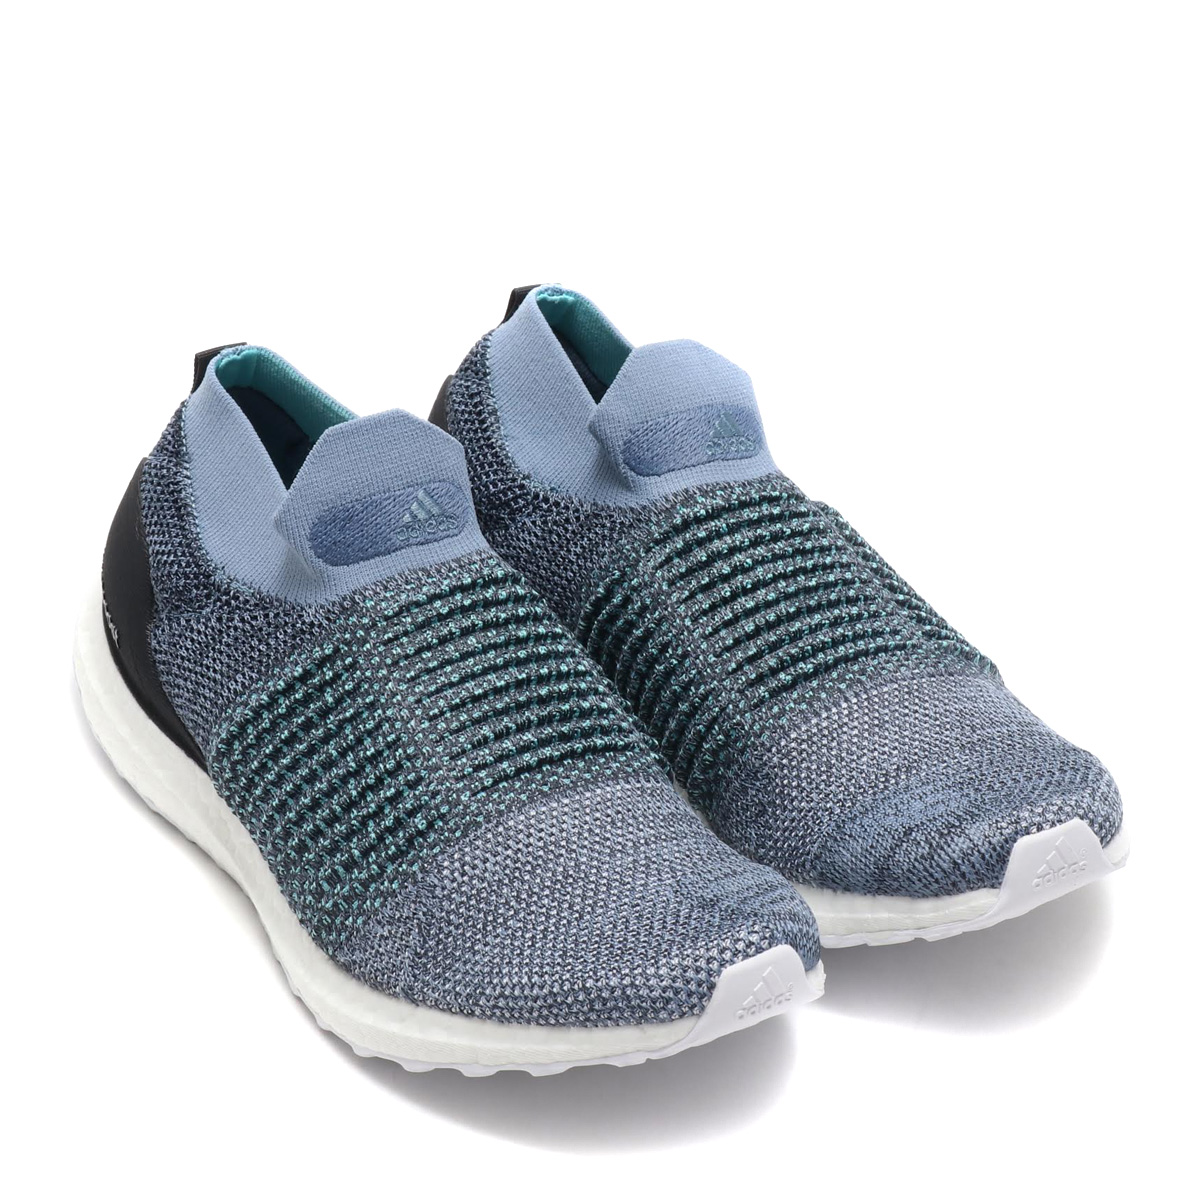 adidas UltraBOOST LACELESS Parley 